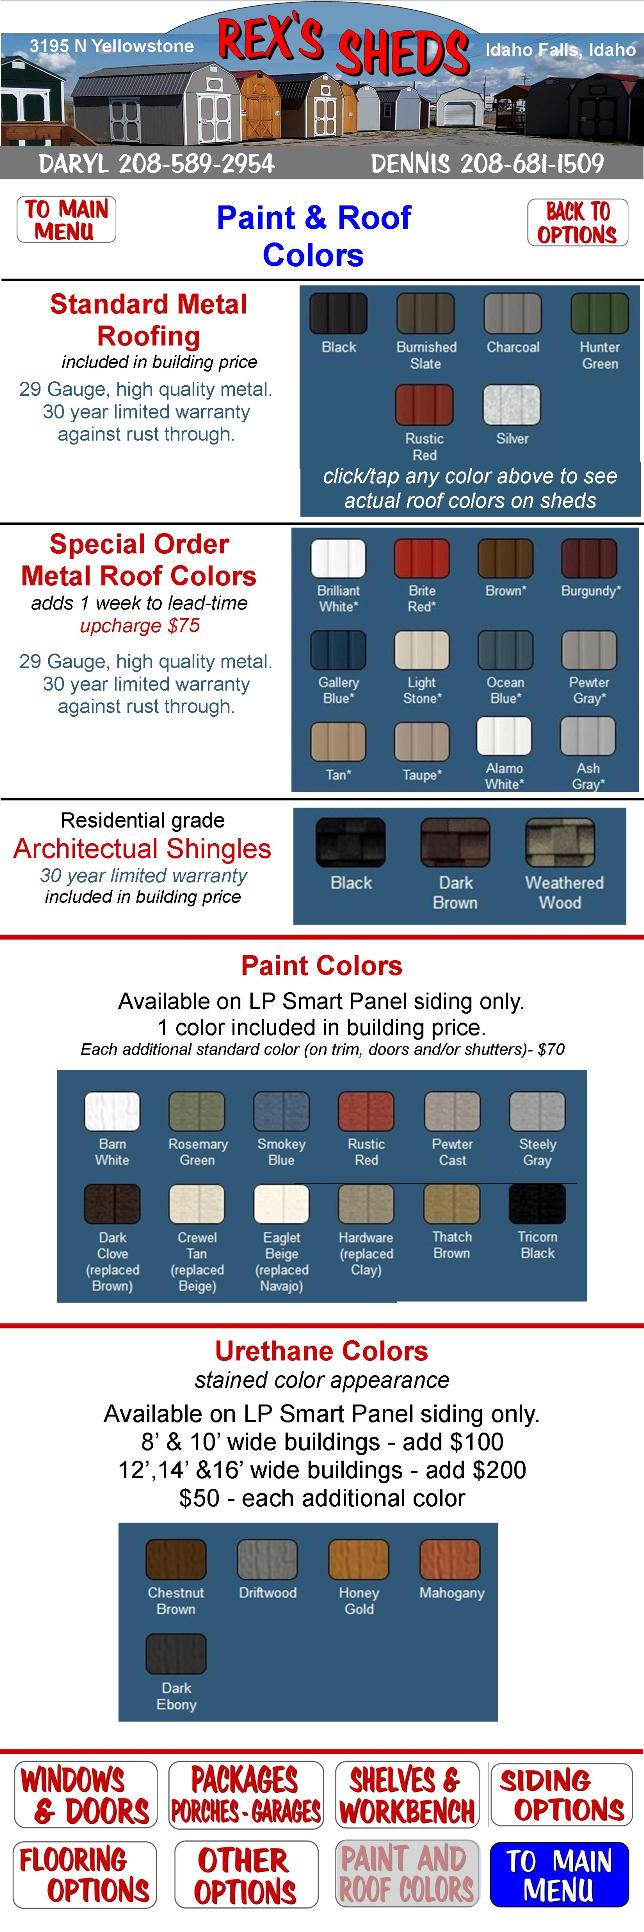 image_containing_samples_of_shed_roof_colors_and_shed_paint_colors